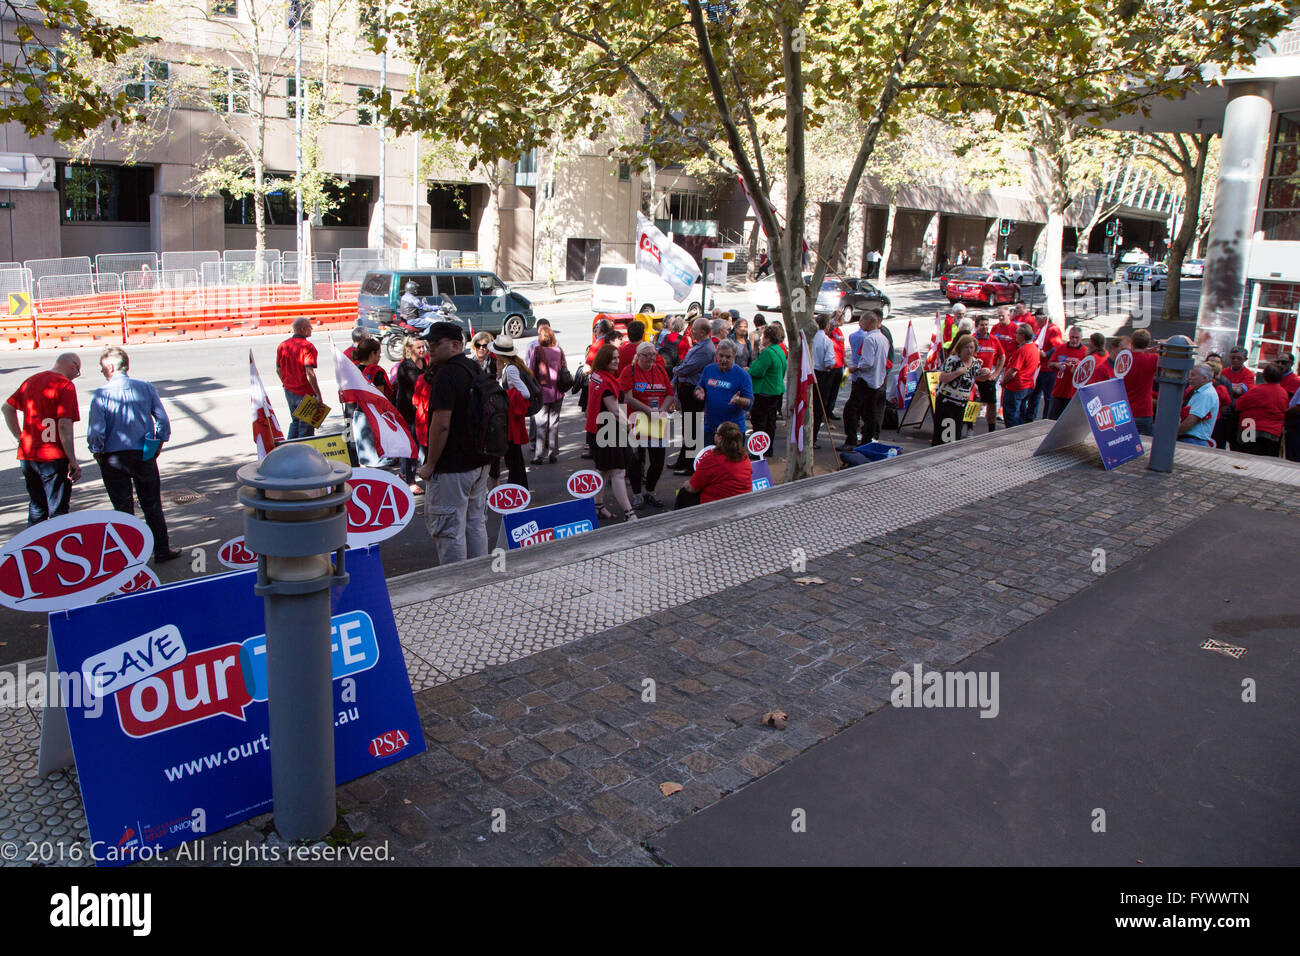 Sydney, Australia. 28 April 2016. Staff in TAFE colleges across the state who are members of the Public Service Association (PSA) are stopping work for three hours on the afternoon of Thursday 28 April to protest against proposed cuts to working conditions. Pictured is the main rally at Ultimo College of TAFE, Sydney (Harris Street entrance). Credit: Richard Milnes/Alamy Live News. Stock Photo